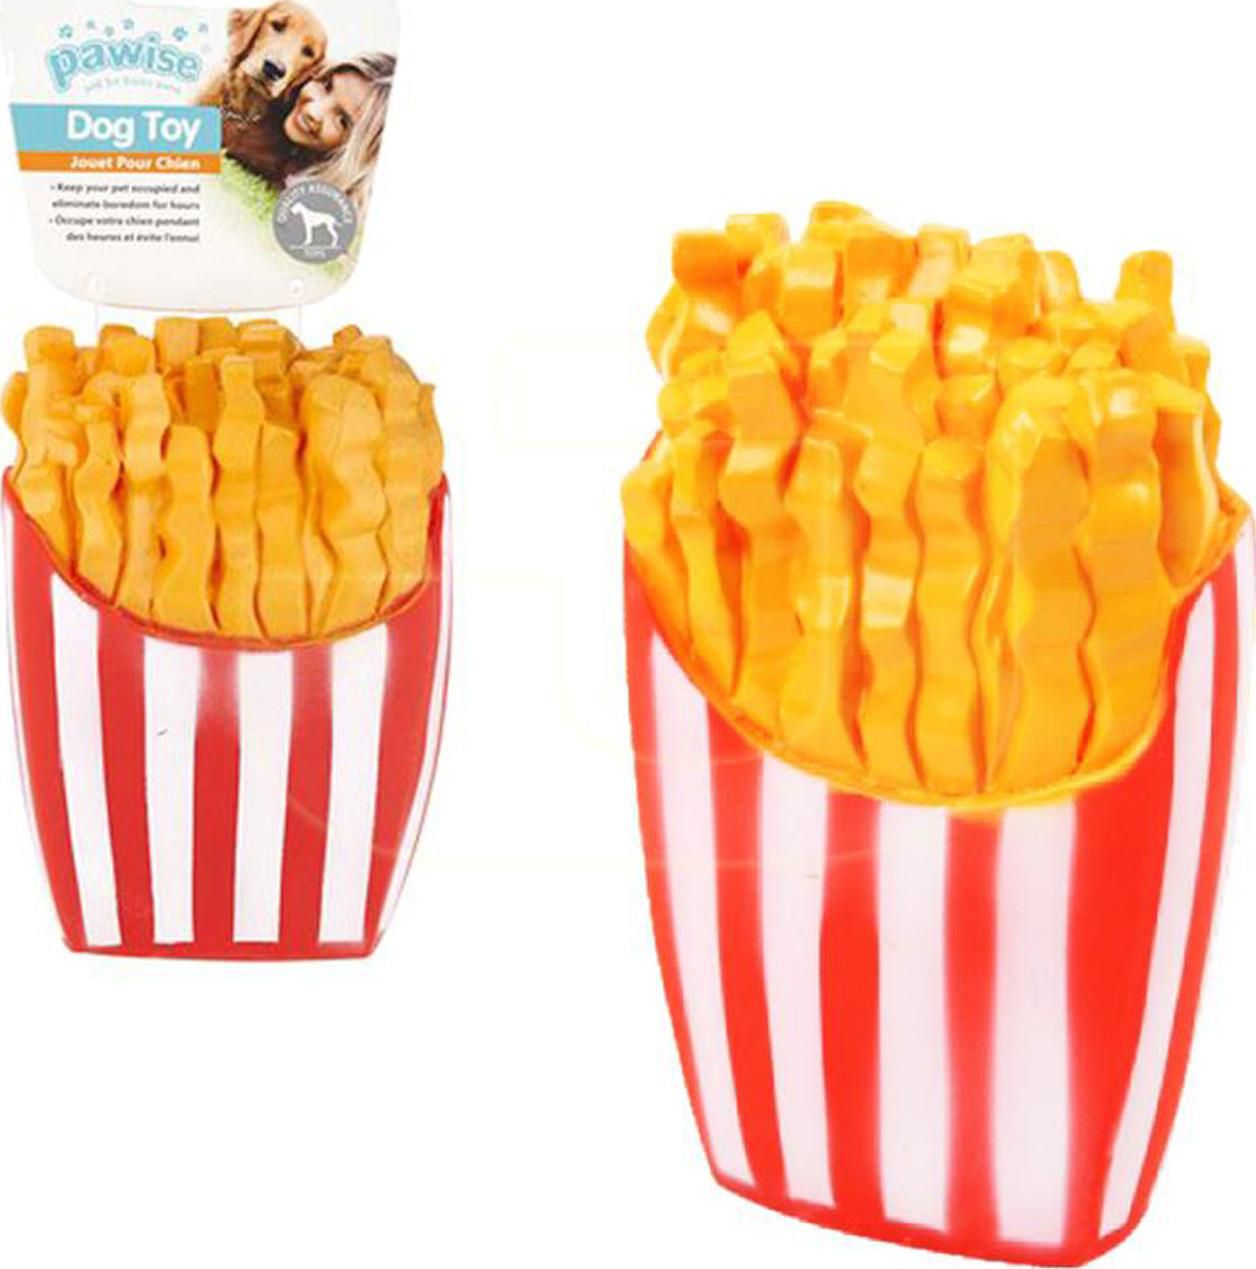 Pawise Dog Vinyl FrencH Fries